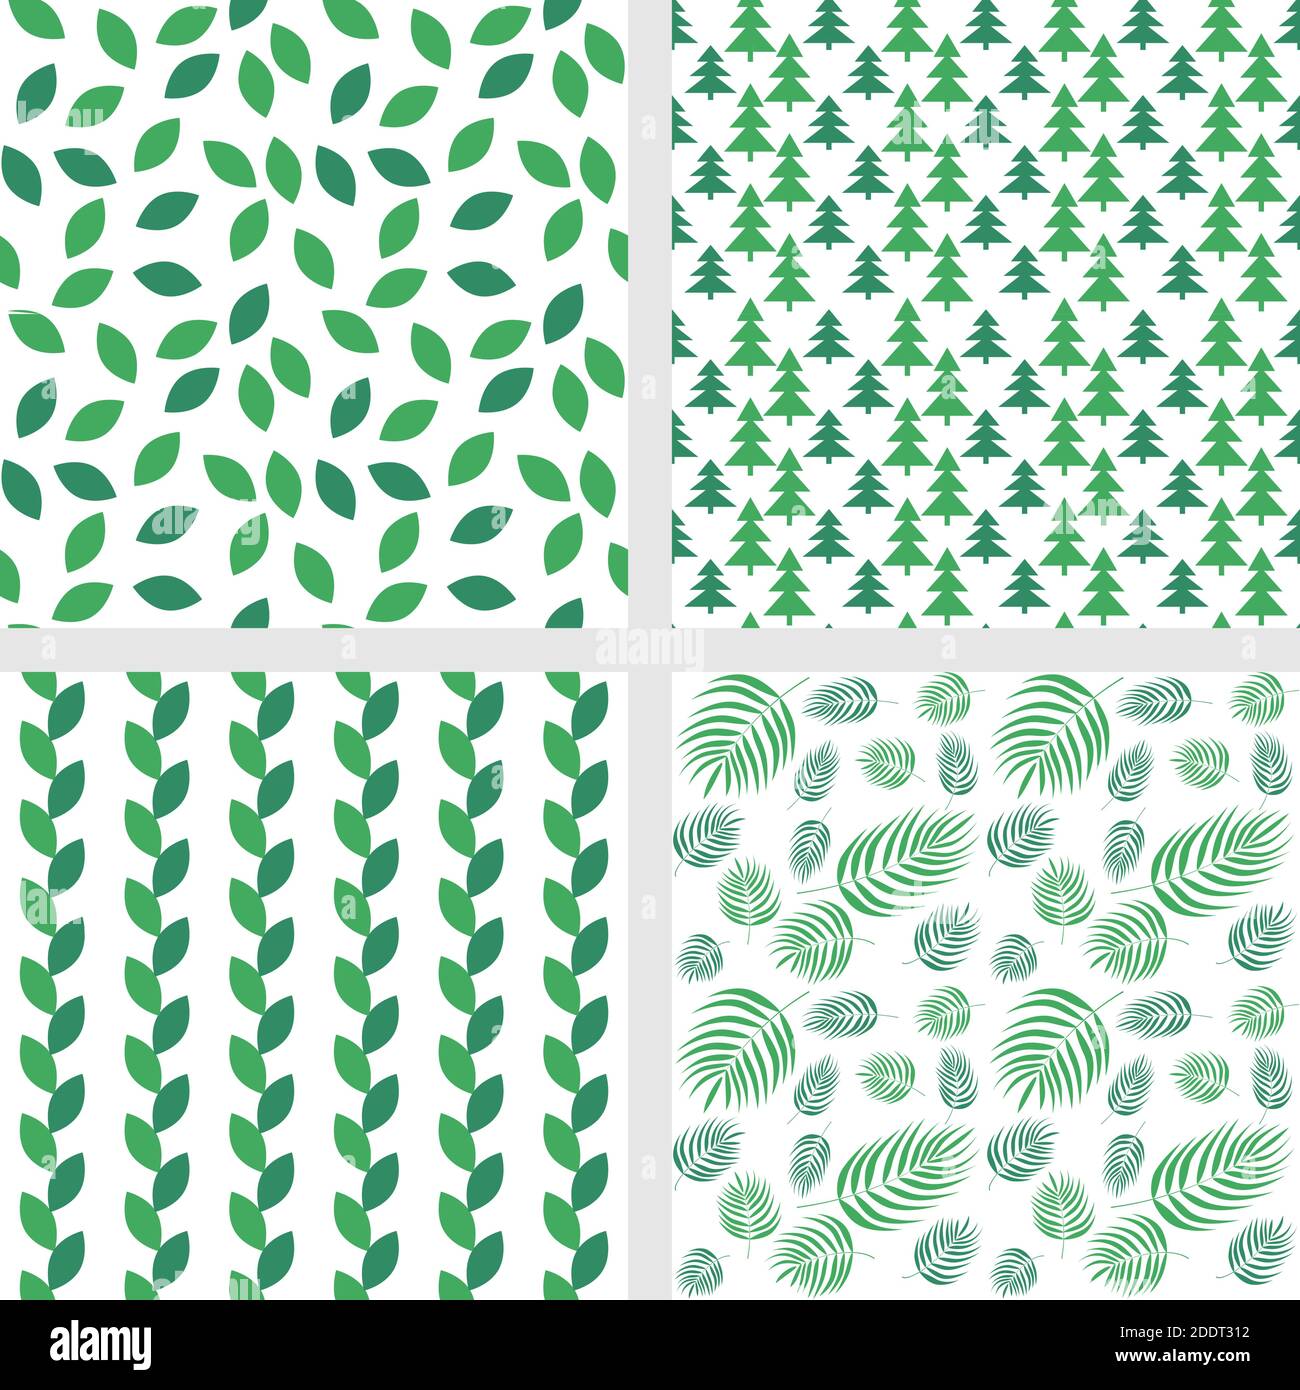 Green plant seamless patterns set. Square floral backgrounds for tablecloths, napkins and other textile products. Leaves vector digital paper swatches Stock Vector